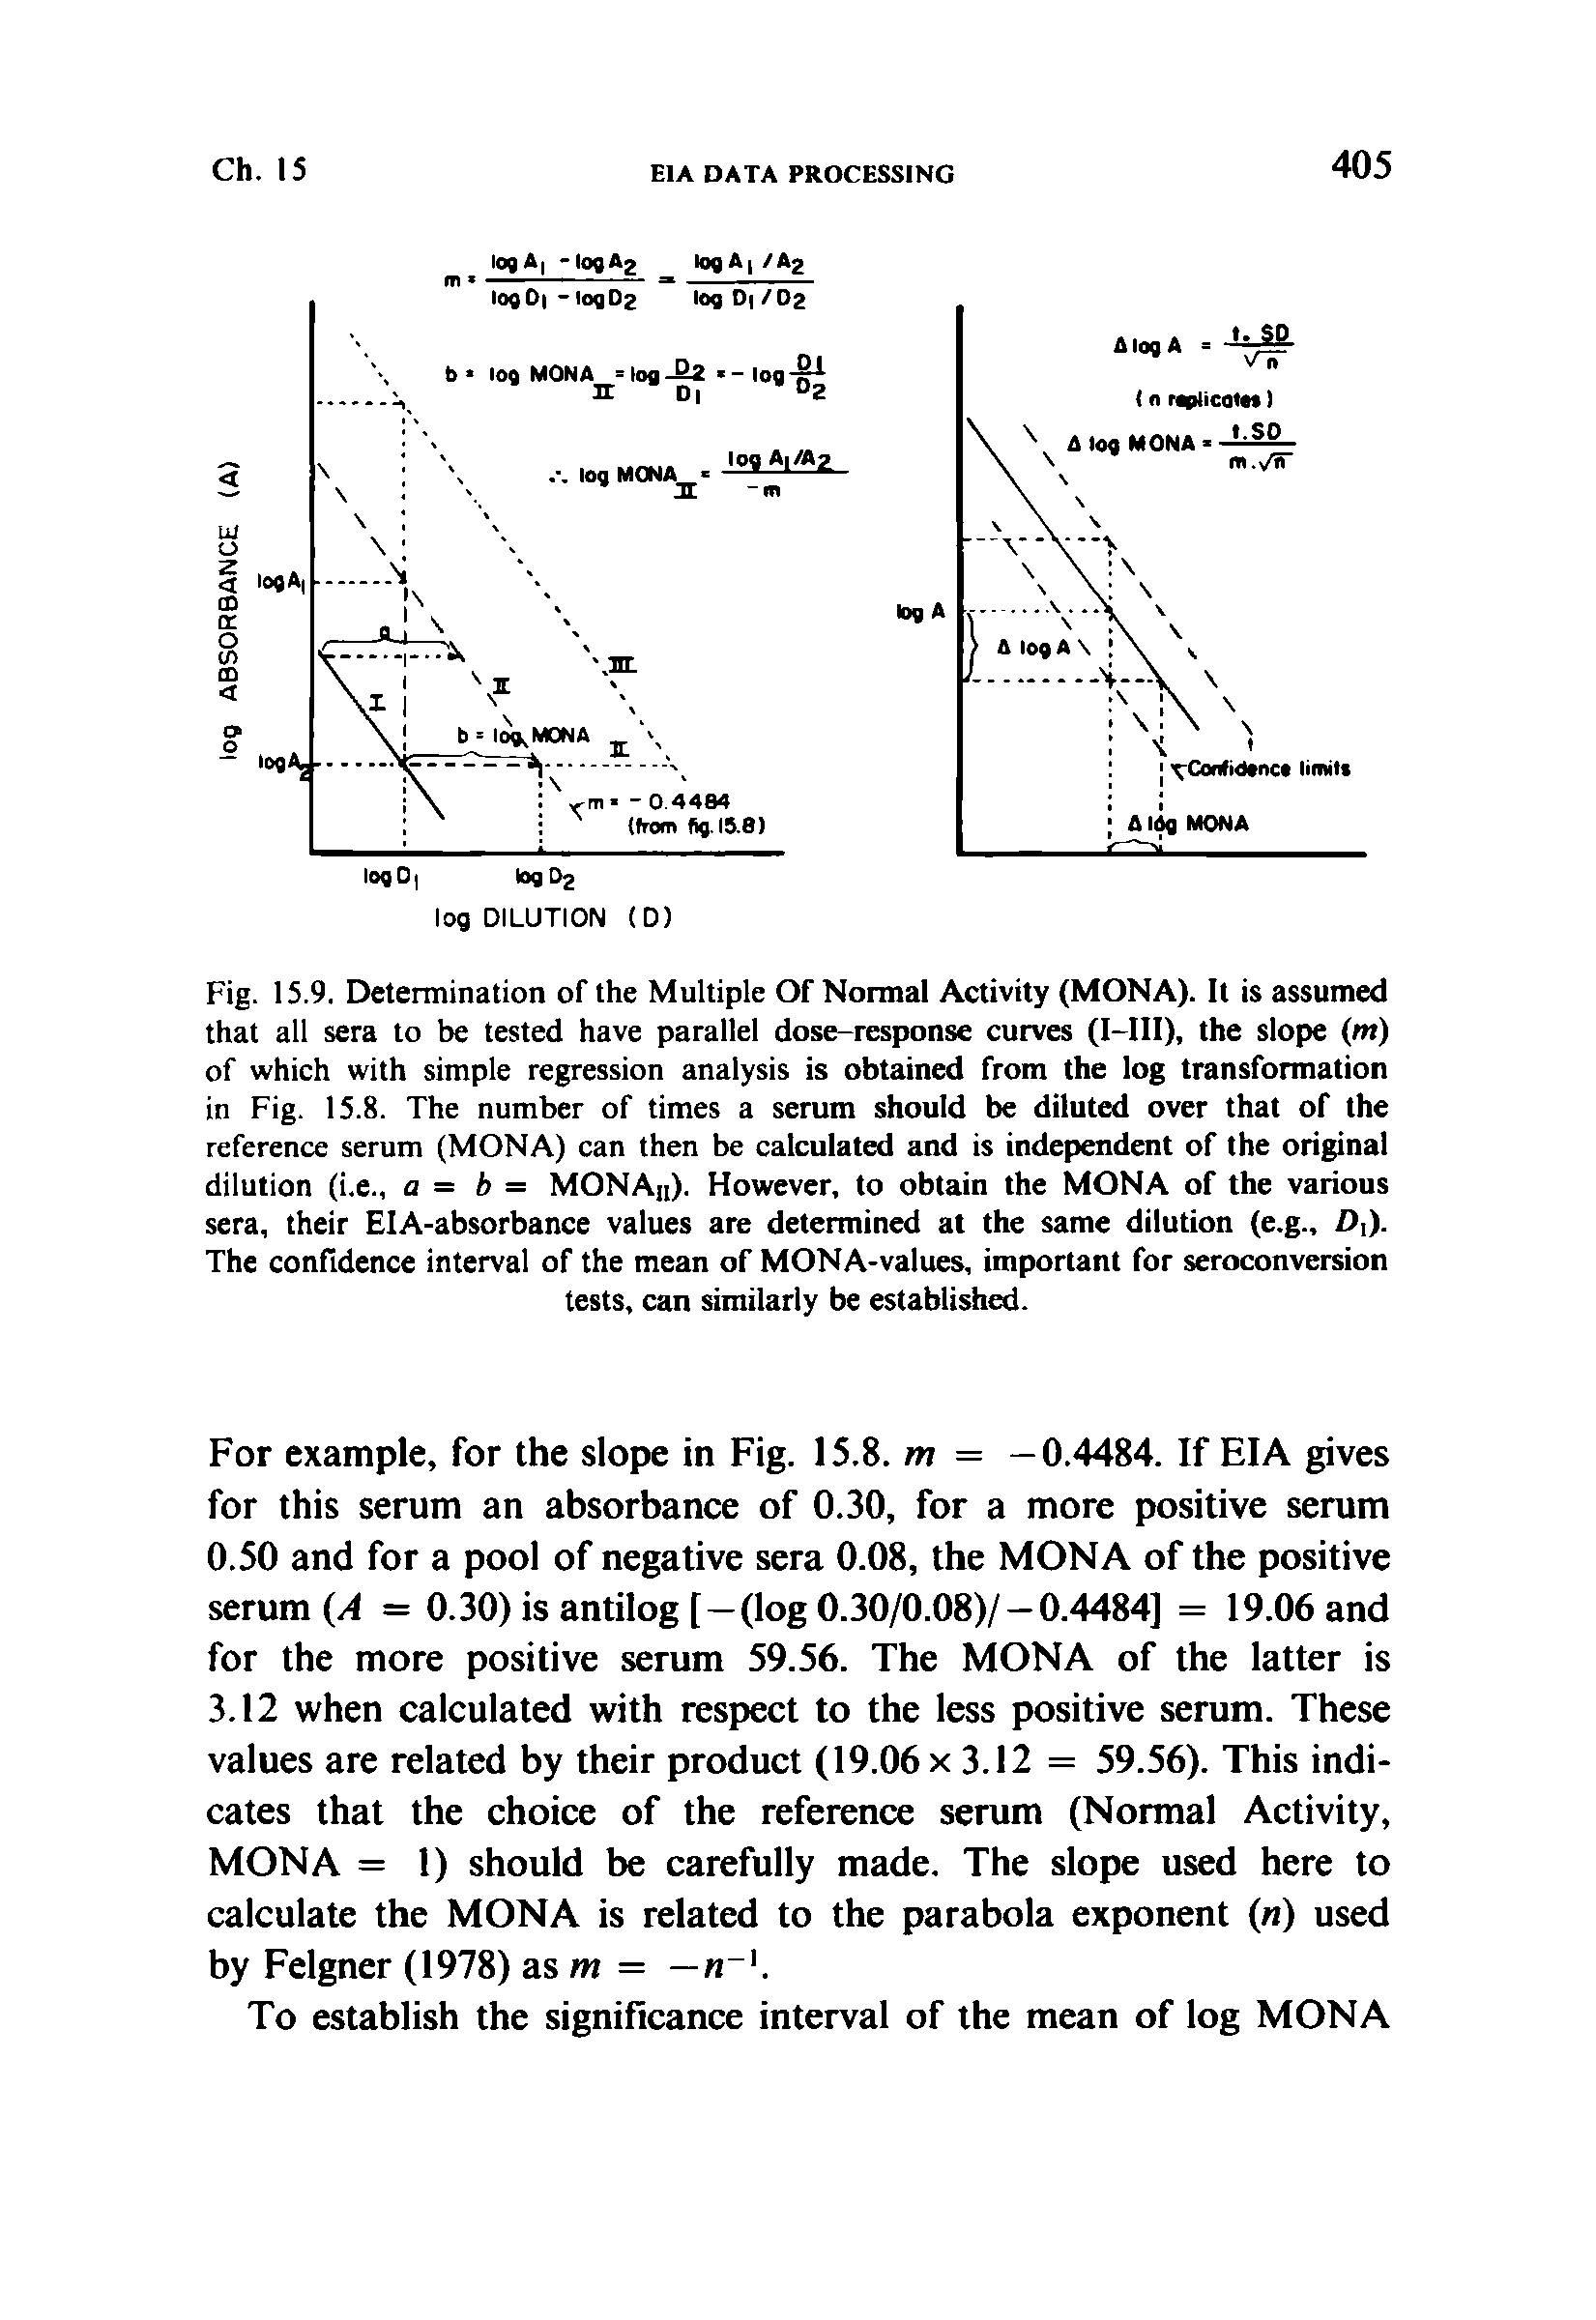 Fig. 15.9. Determination of the Multiple Of Normal Activity (MONA). It is assumed that all sera to be tested have parallel dose-response curves (I-lII), the slope (m) of which with simple regression analysis is obtained from the log transformation in Fig. 15.8. The number of times a serum should be diluted over that of the reference serum (MONA) can then be calculated and is independent of the original dilution (i.e., a = b = MONAn). However, to obtain the MONA of the various sera, their EIA-absorbance values are determined at the same dilution (e.g., D ). The confidence interval of the mean of MONA-values, important for seroconversion tests, can similarly be established.